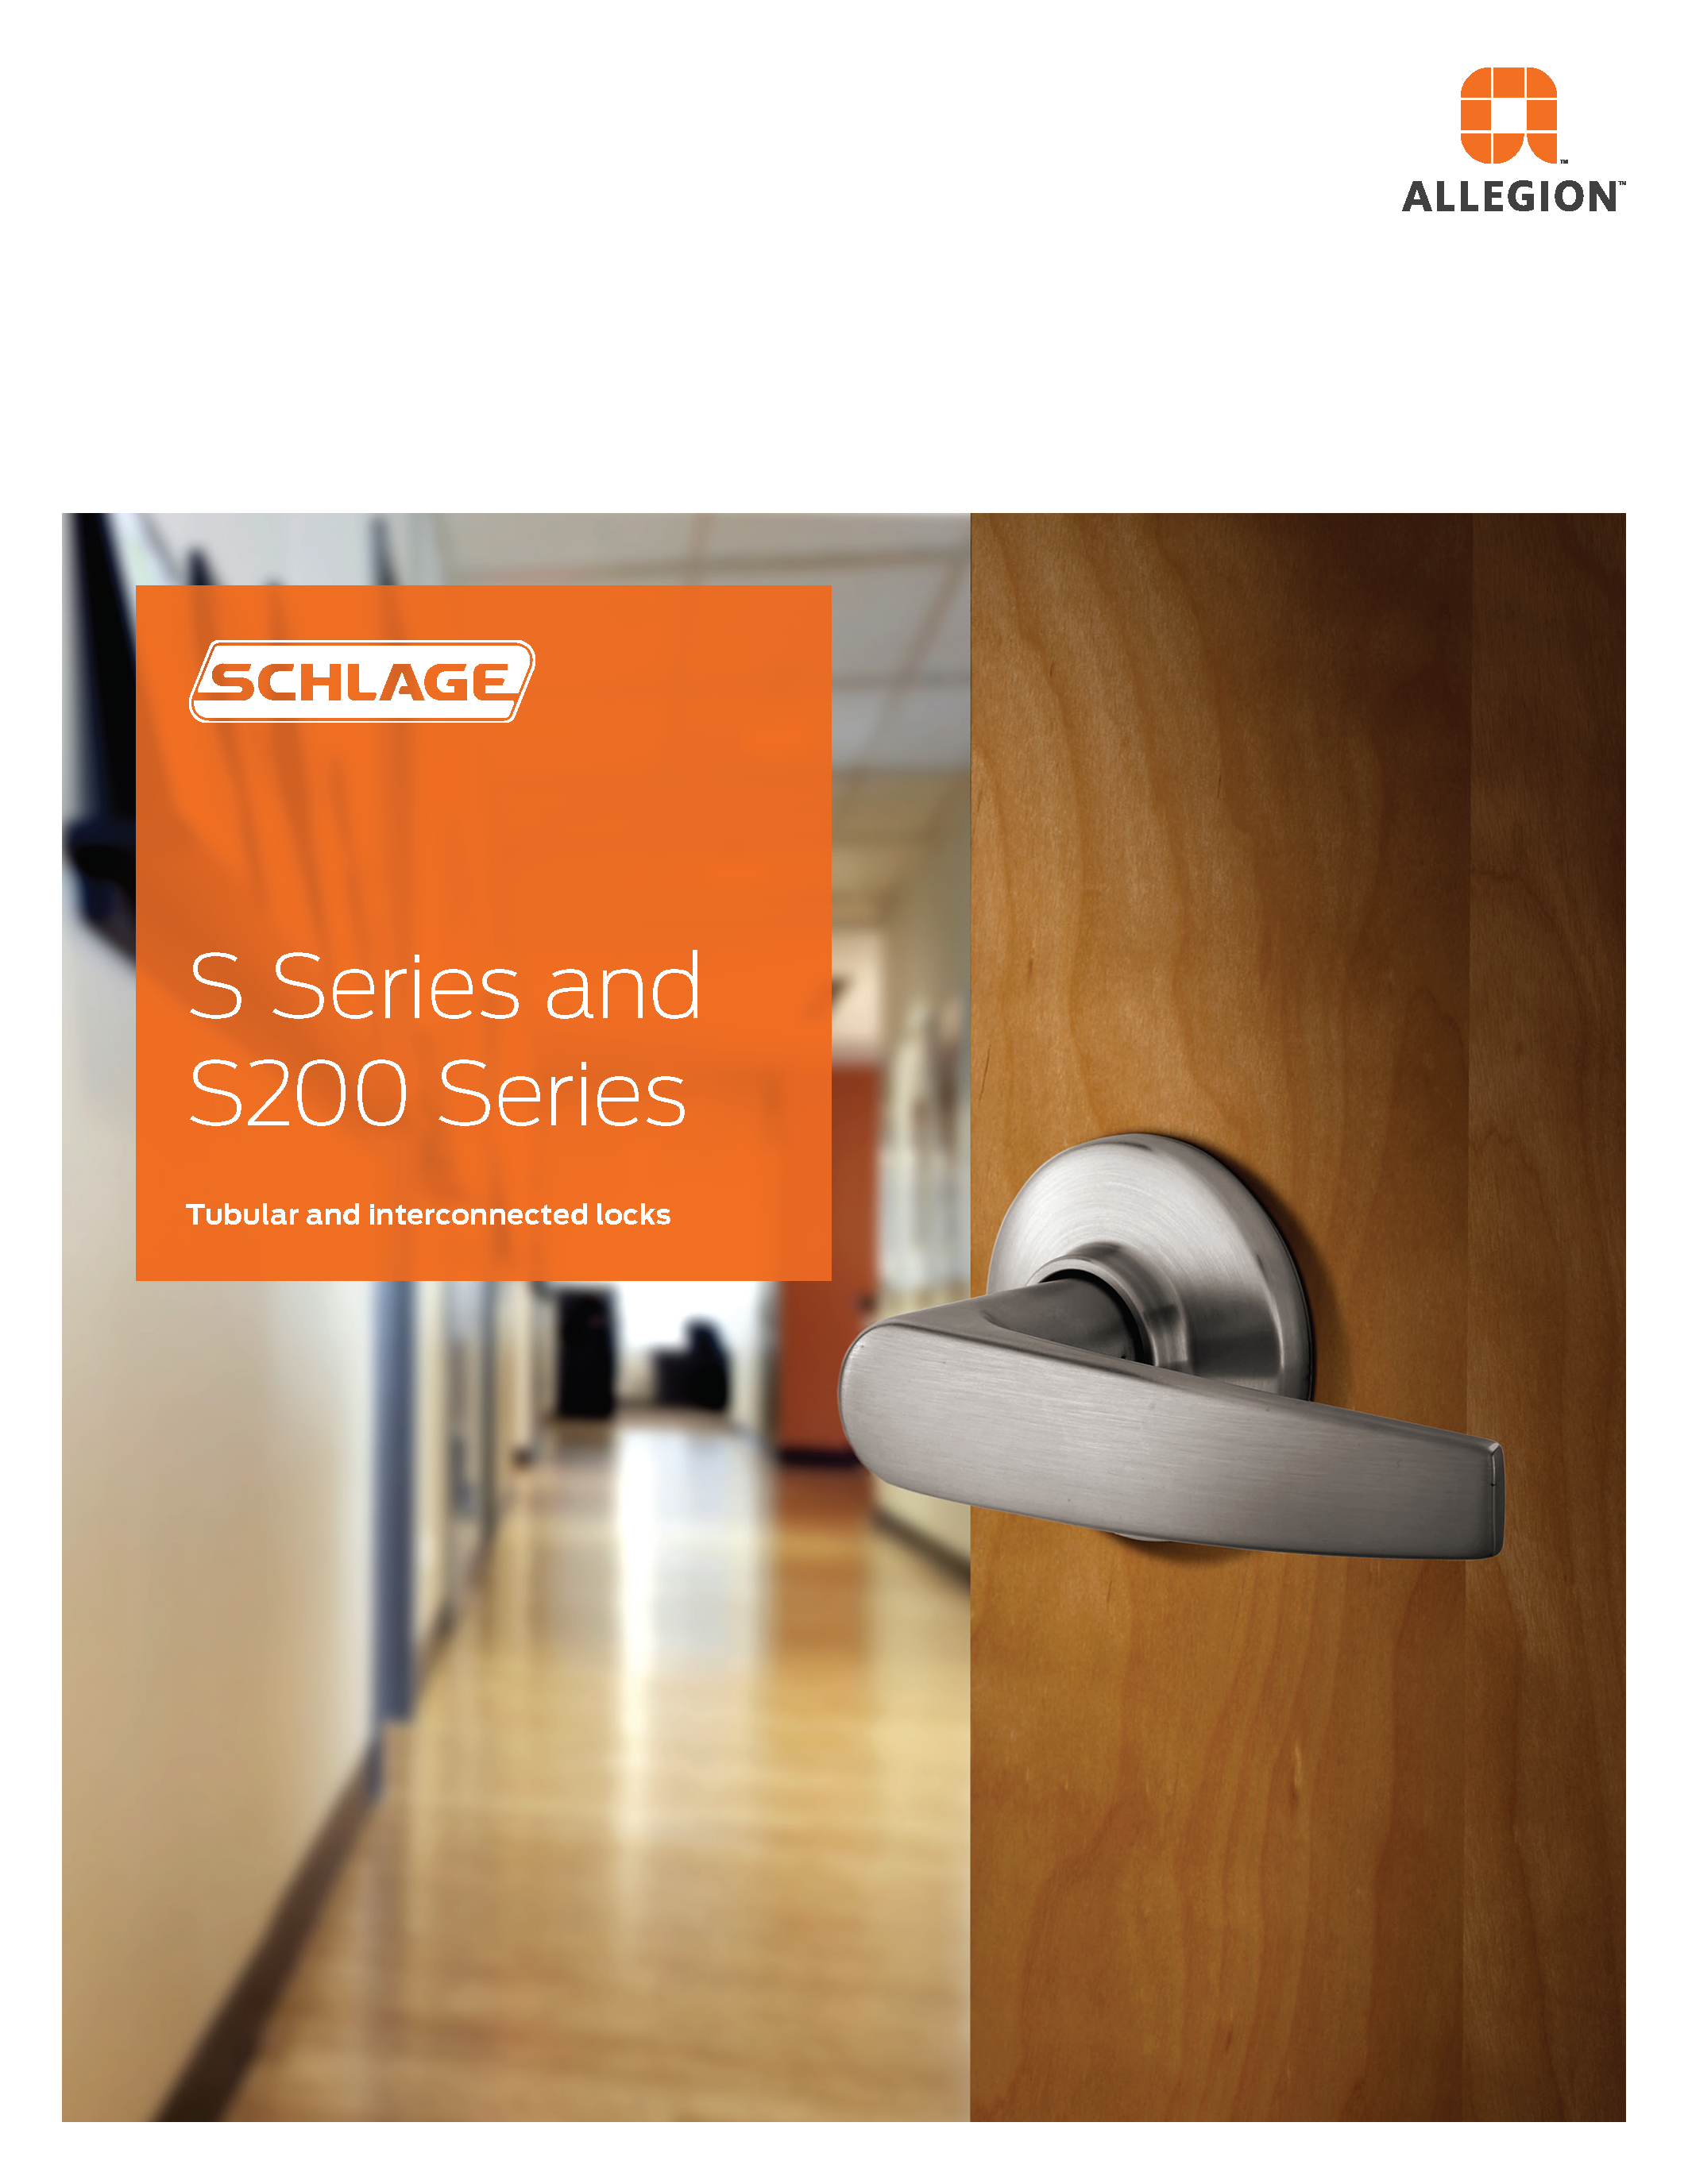 Schlage S Series and S200 Series Tubular and Interconnected Locks